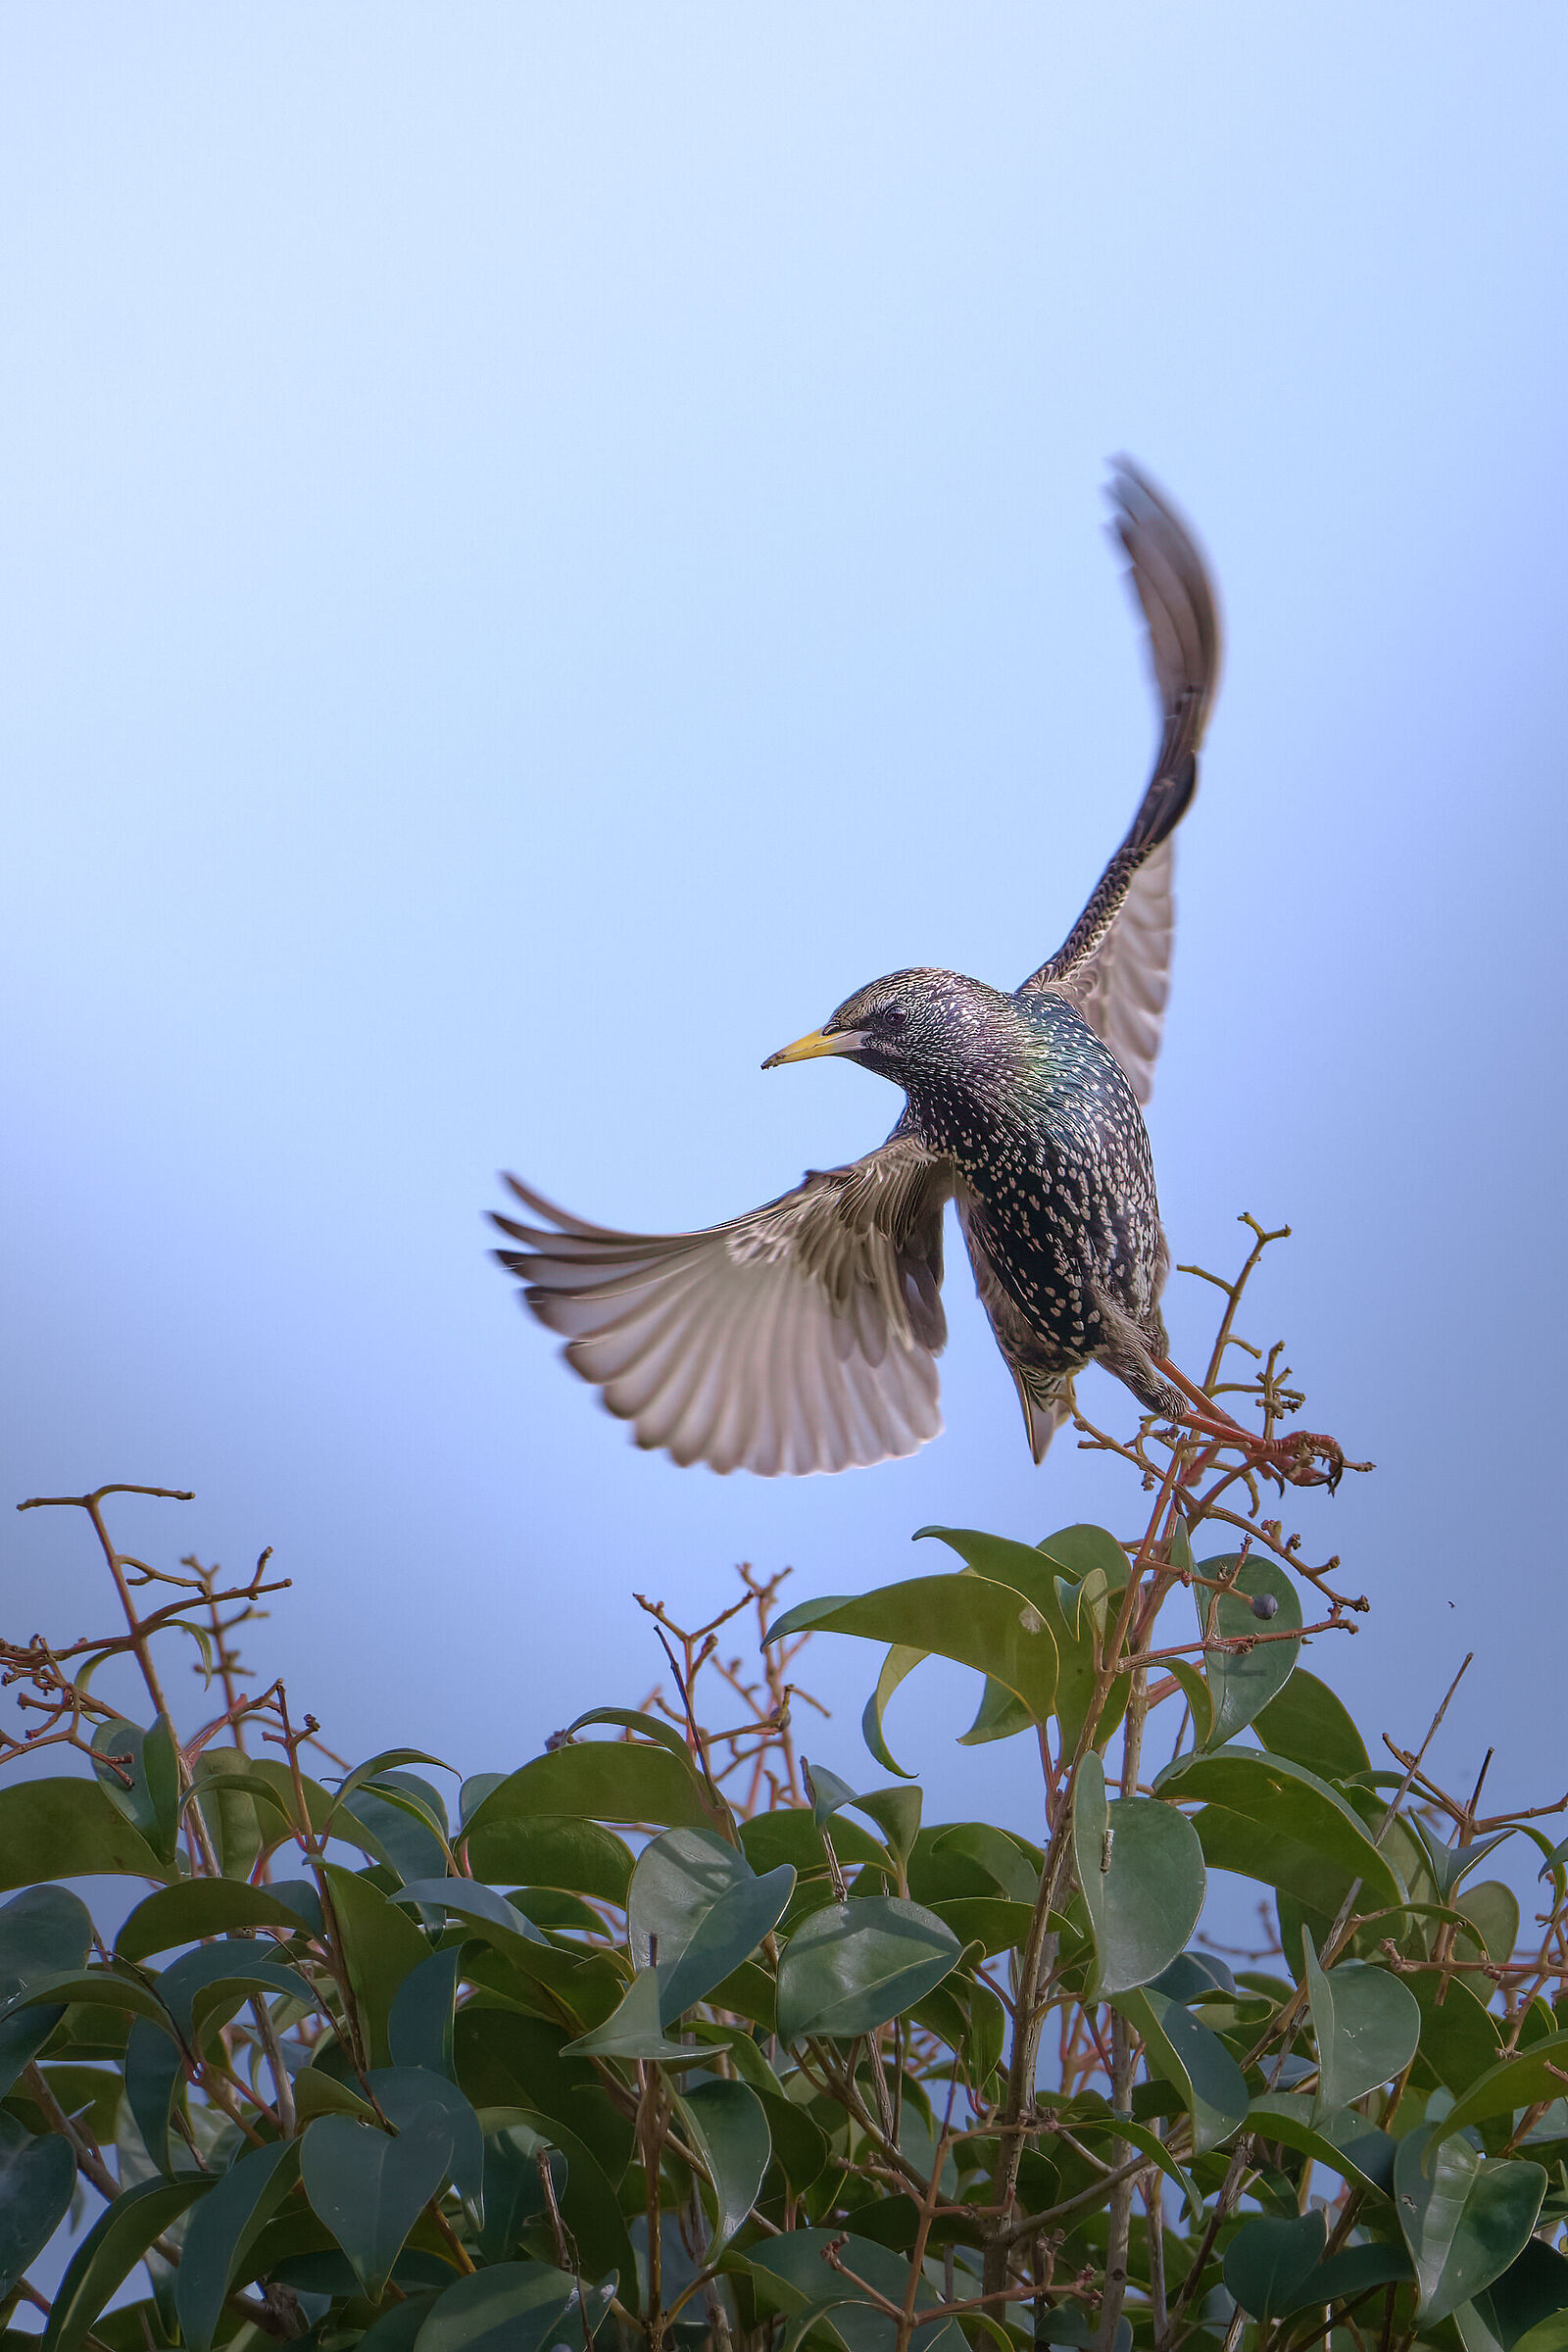 Starling in the garden...